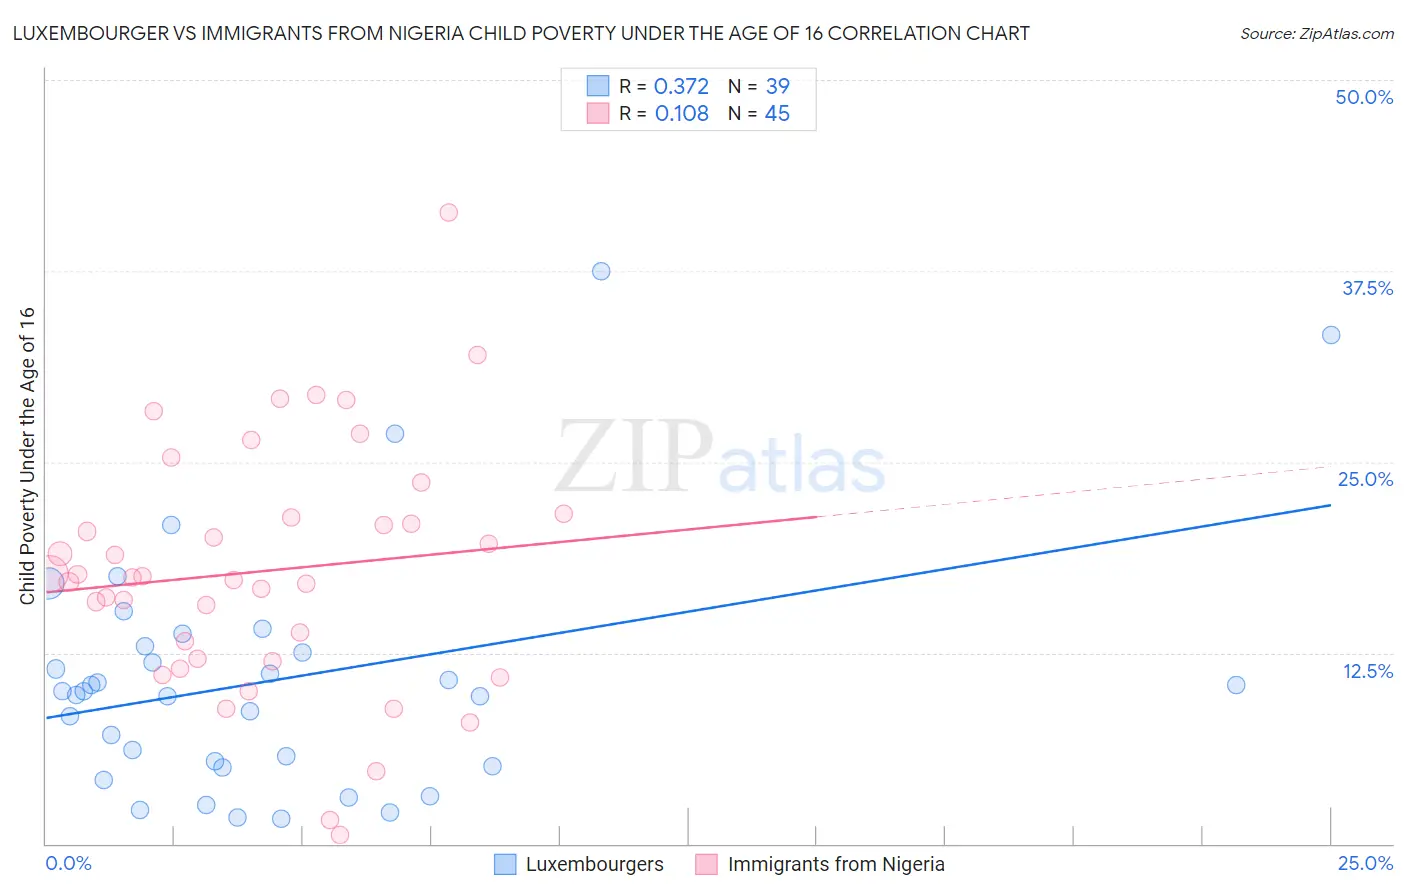 Luxembourger vs Immigrants from Nigeria Child Poverty Under the Age of 16